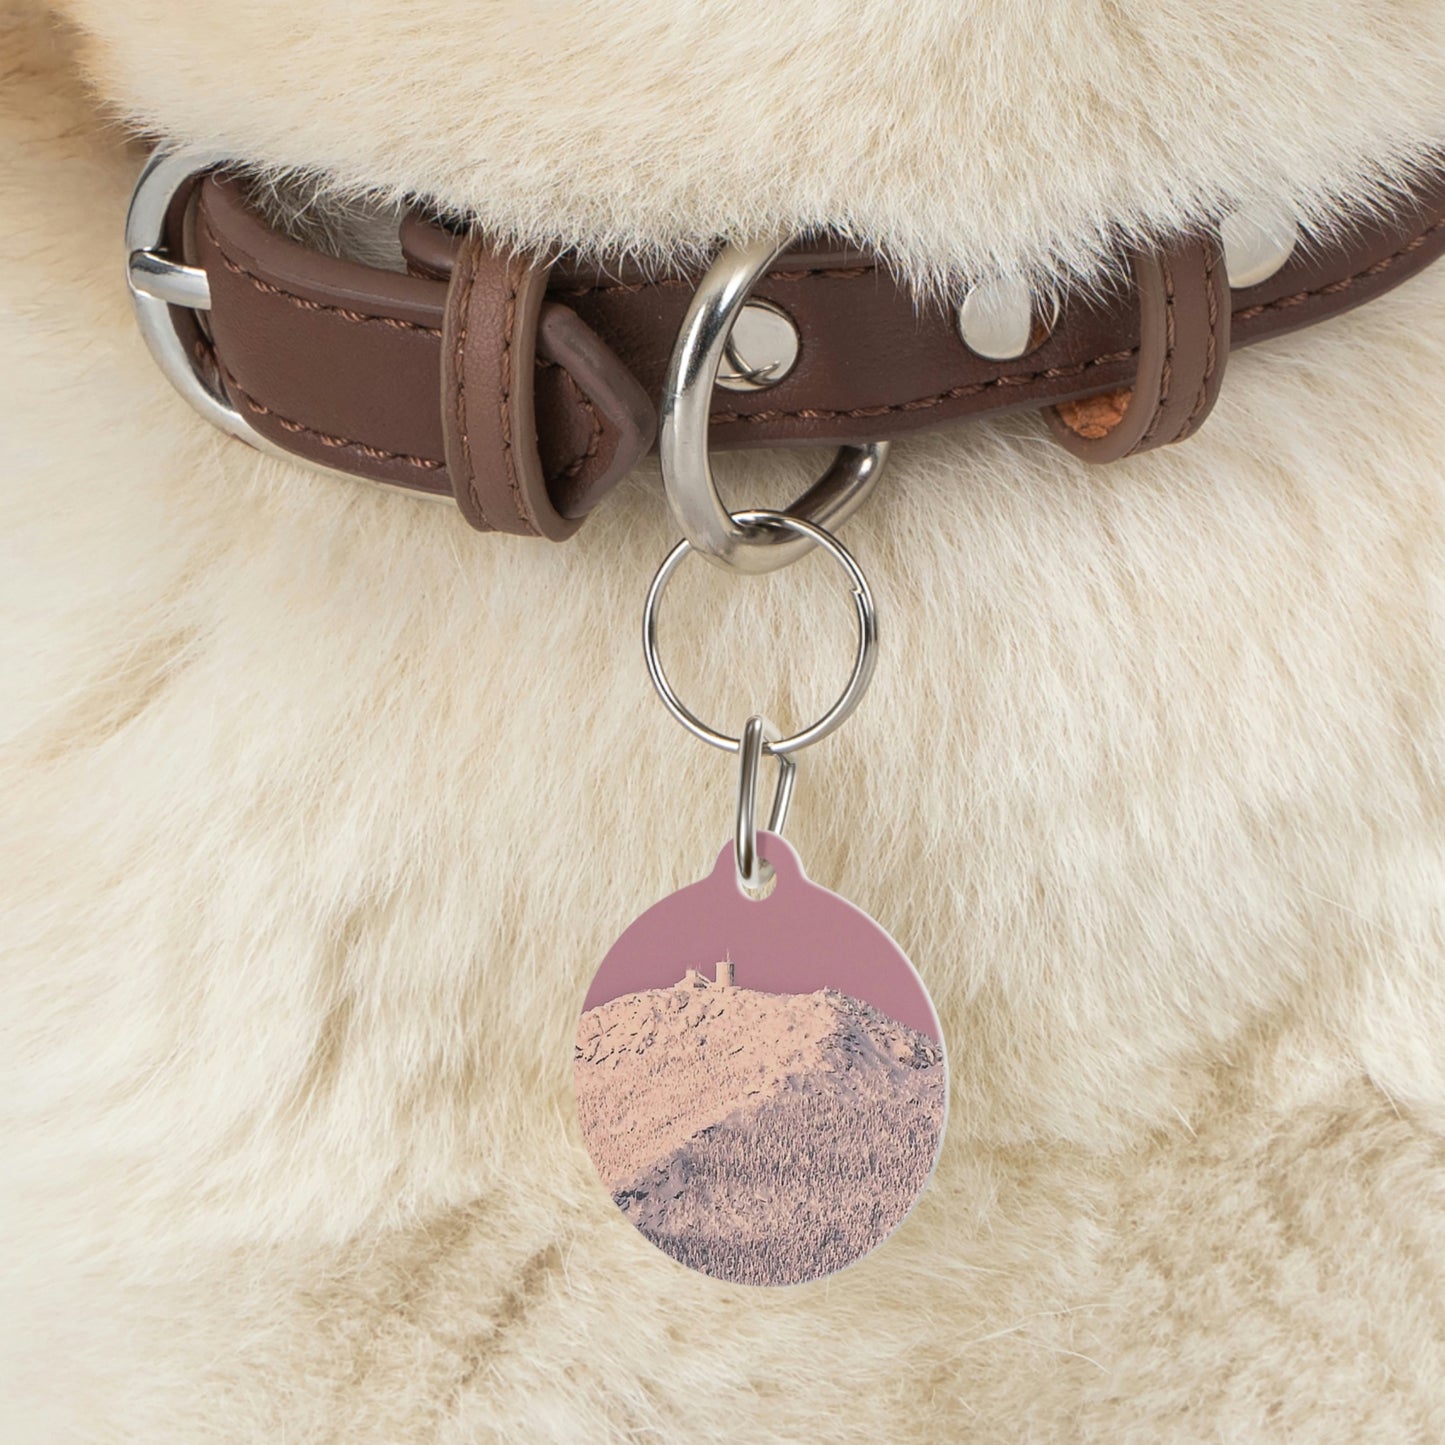 Pet Tag - Pretty in Pink, Whiteface